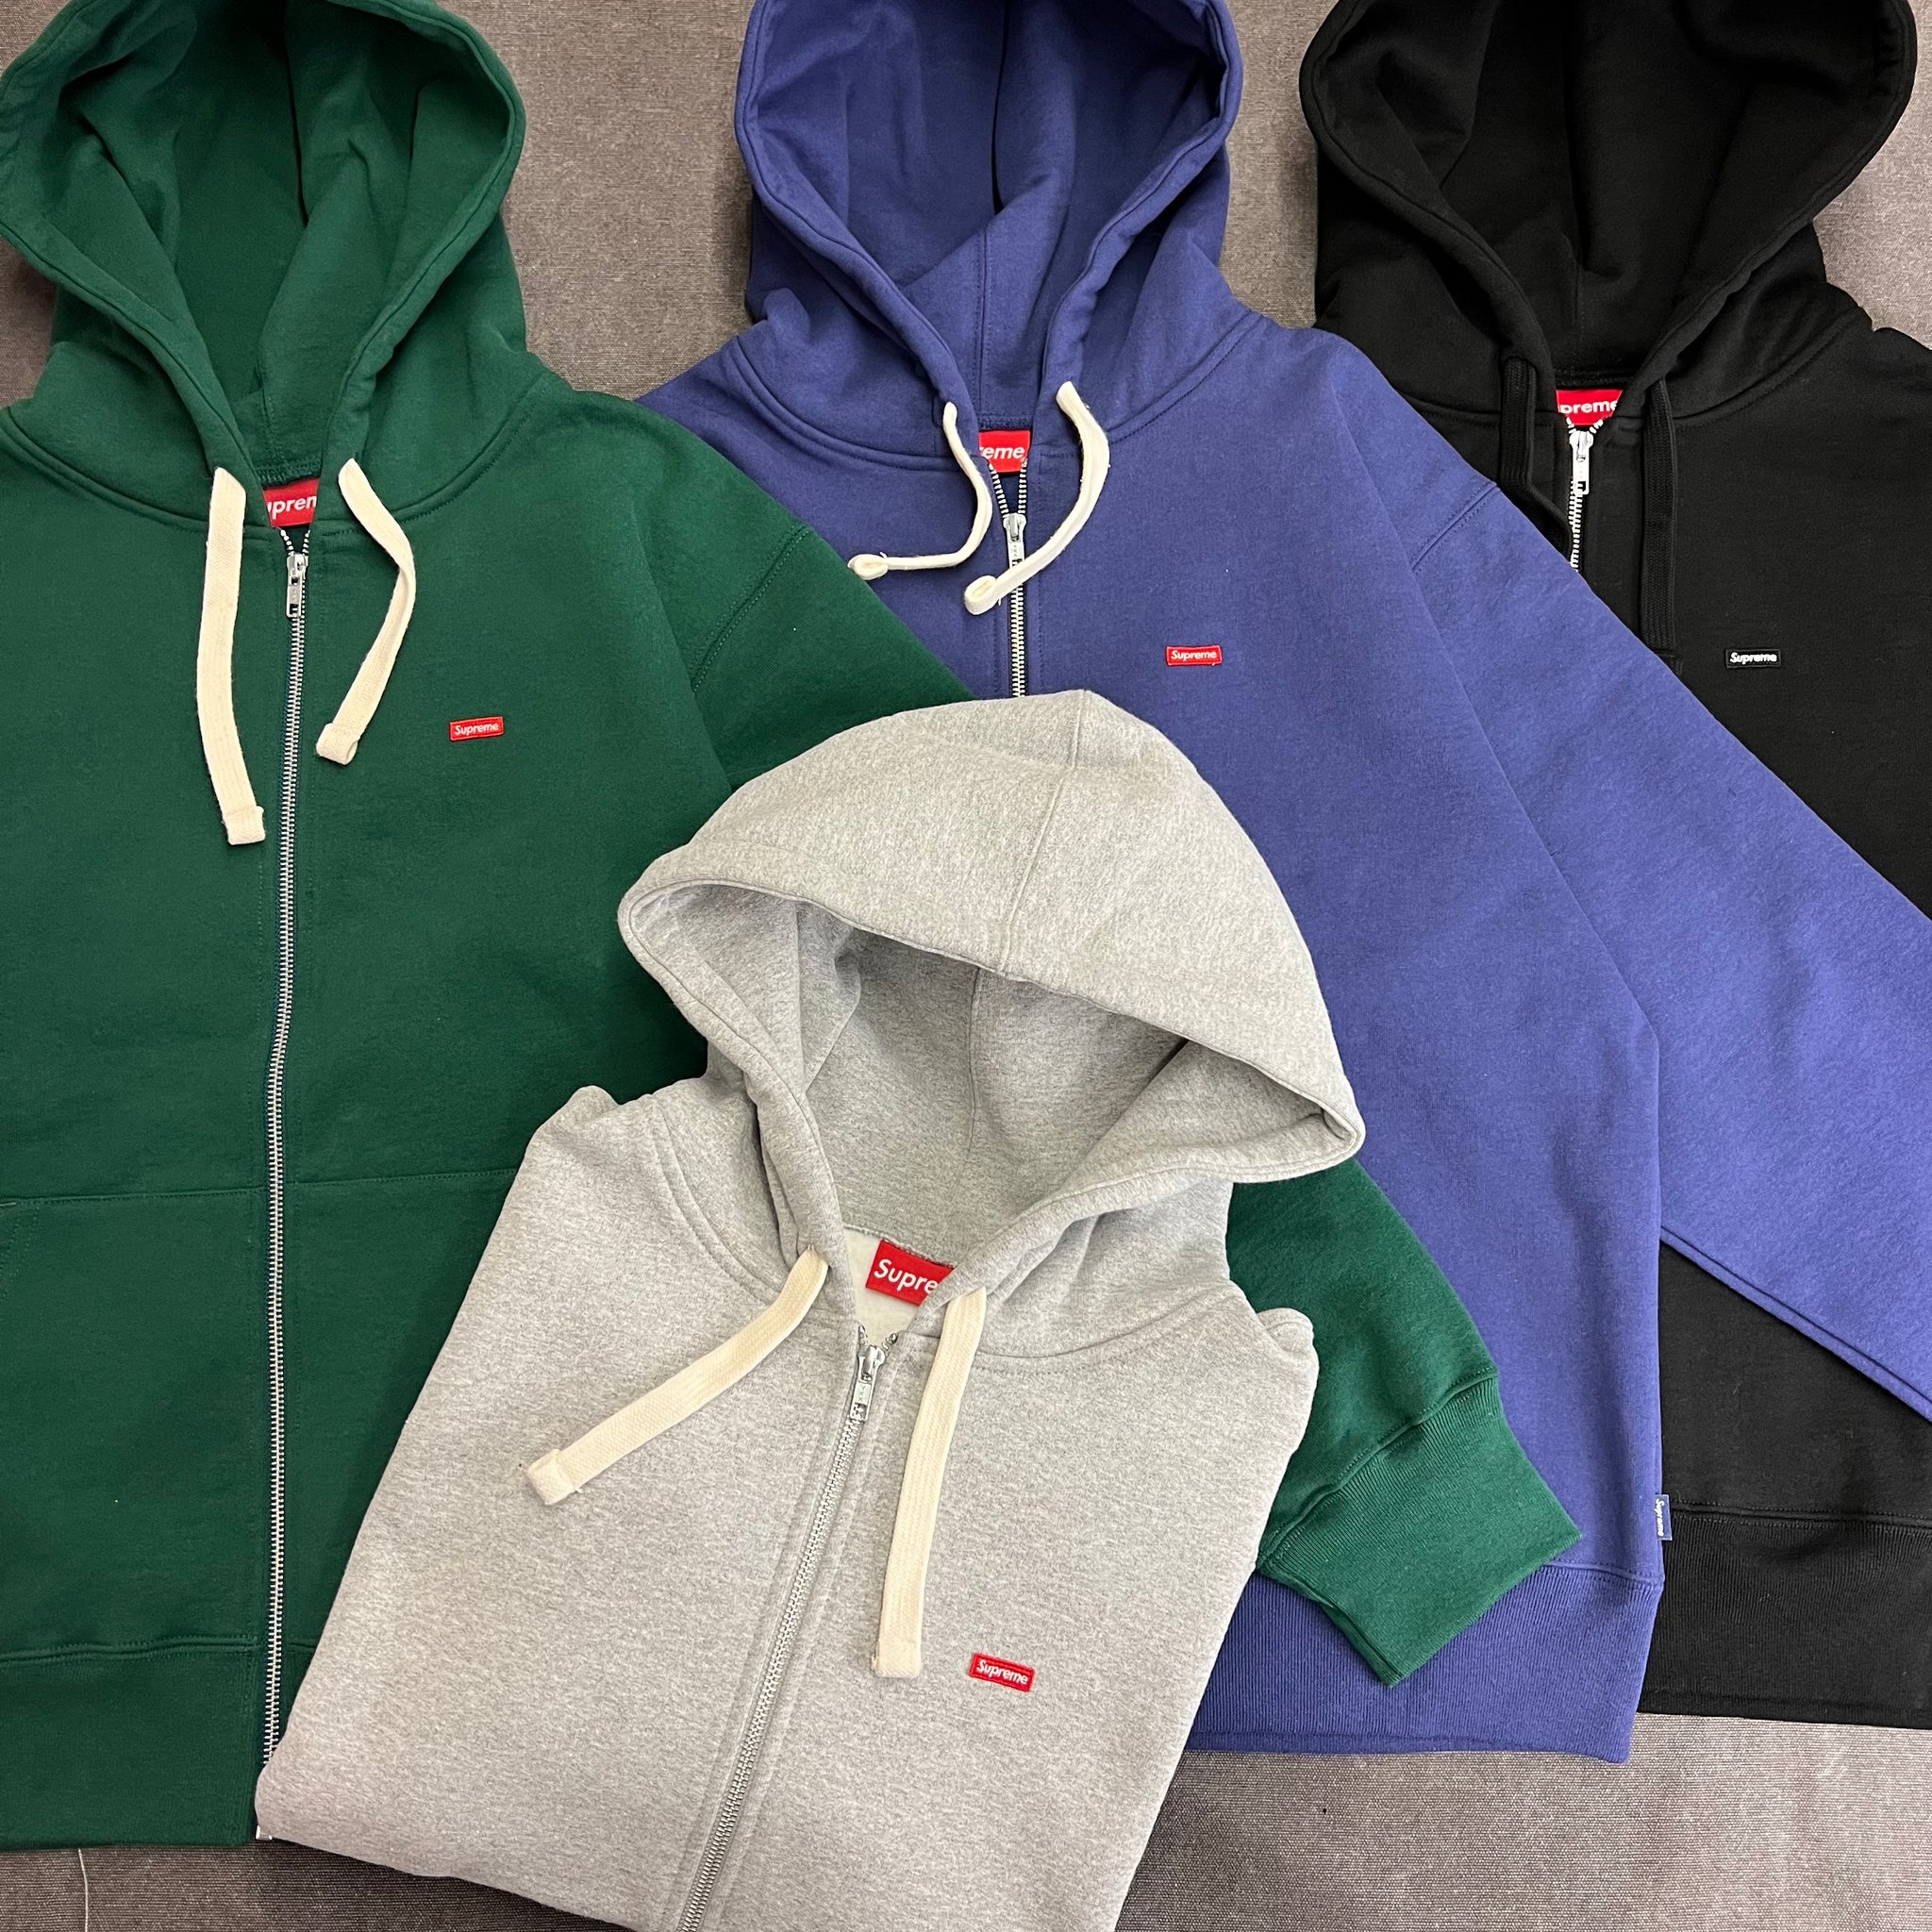 Supreme Small Box Drawcord Zip Up Hooded